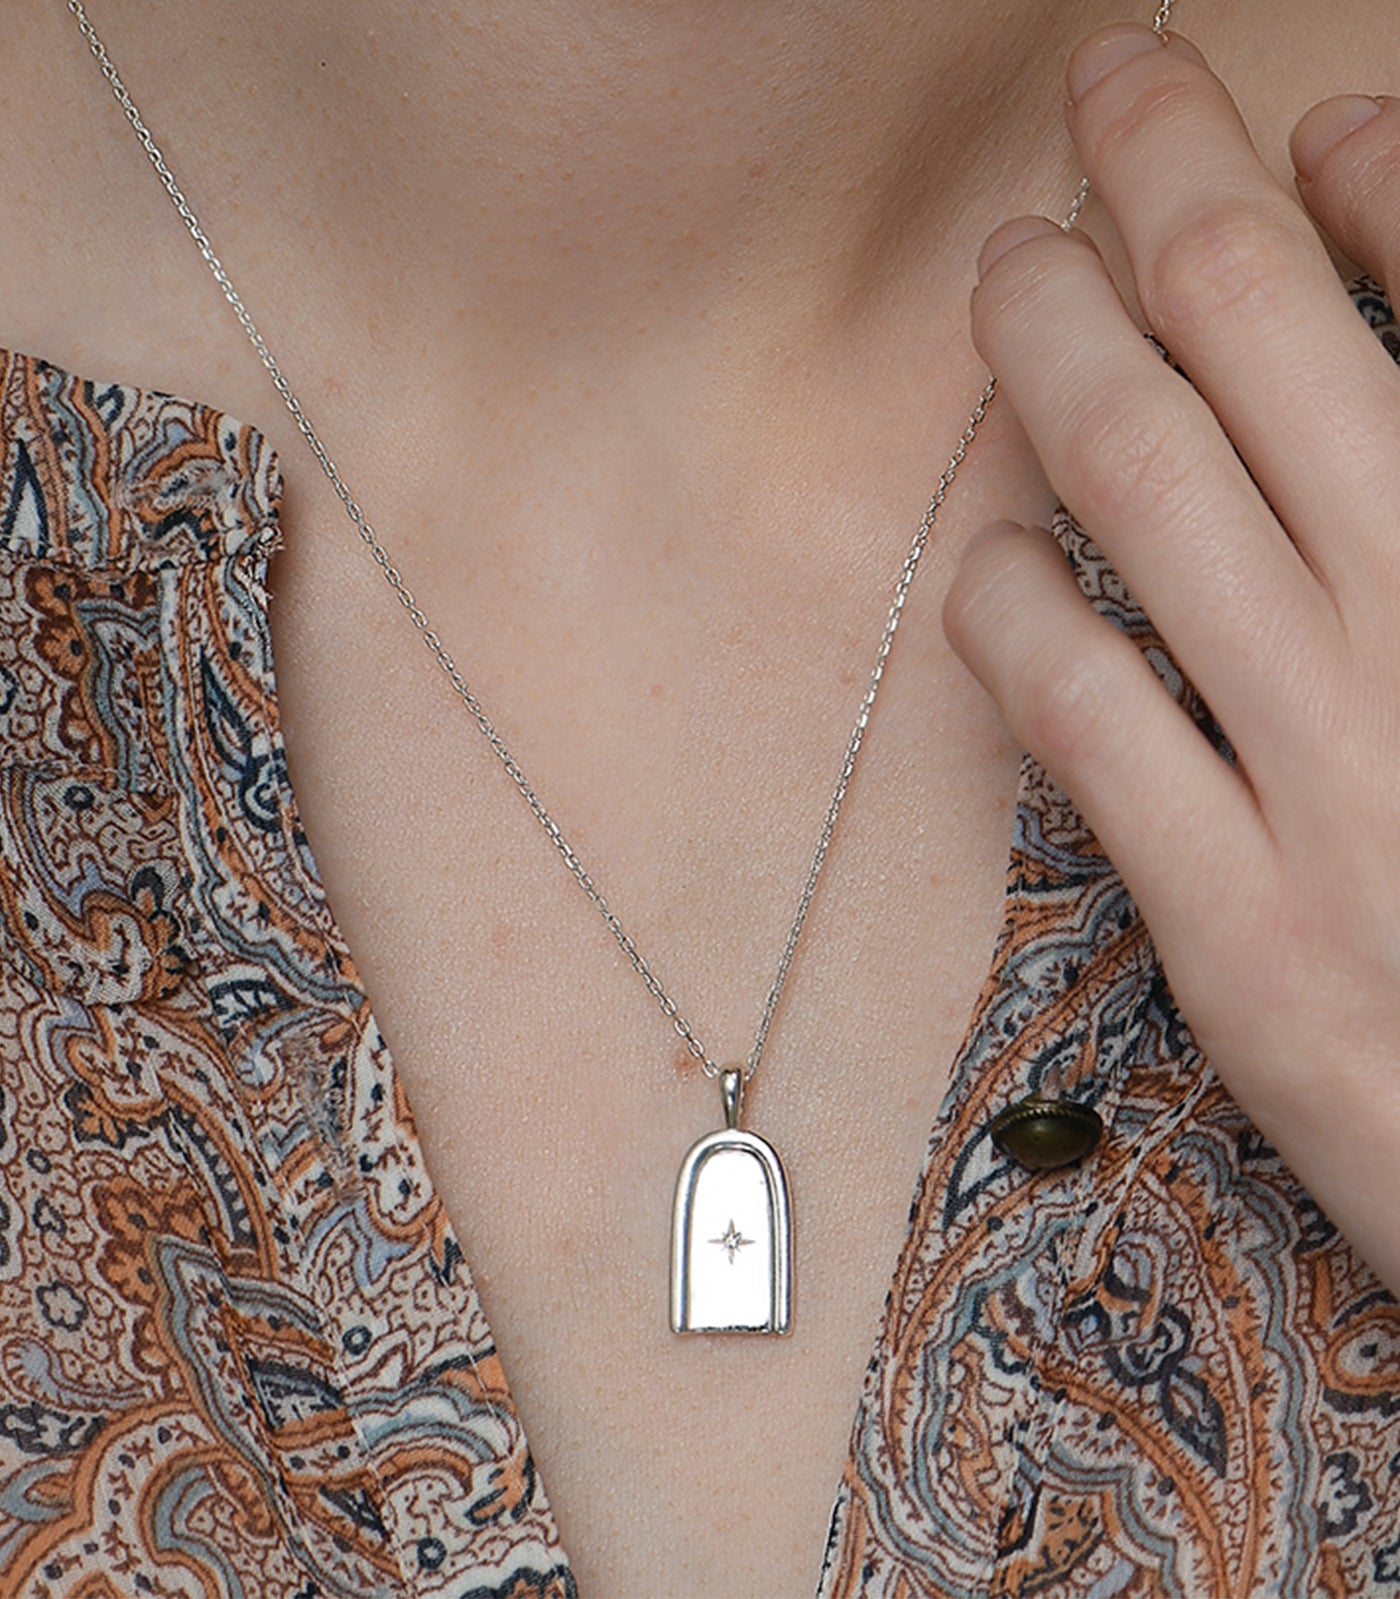 A sterling silver necklace with a dainty chain and an arch pendant.